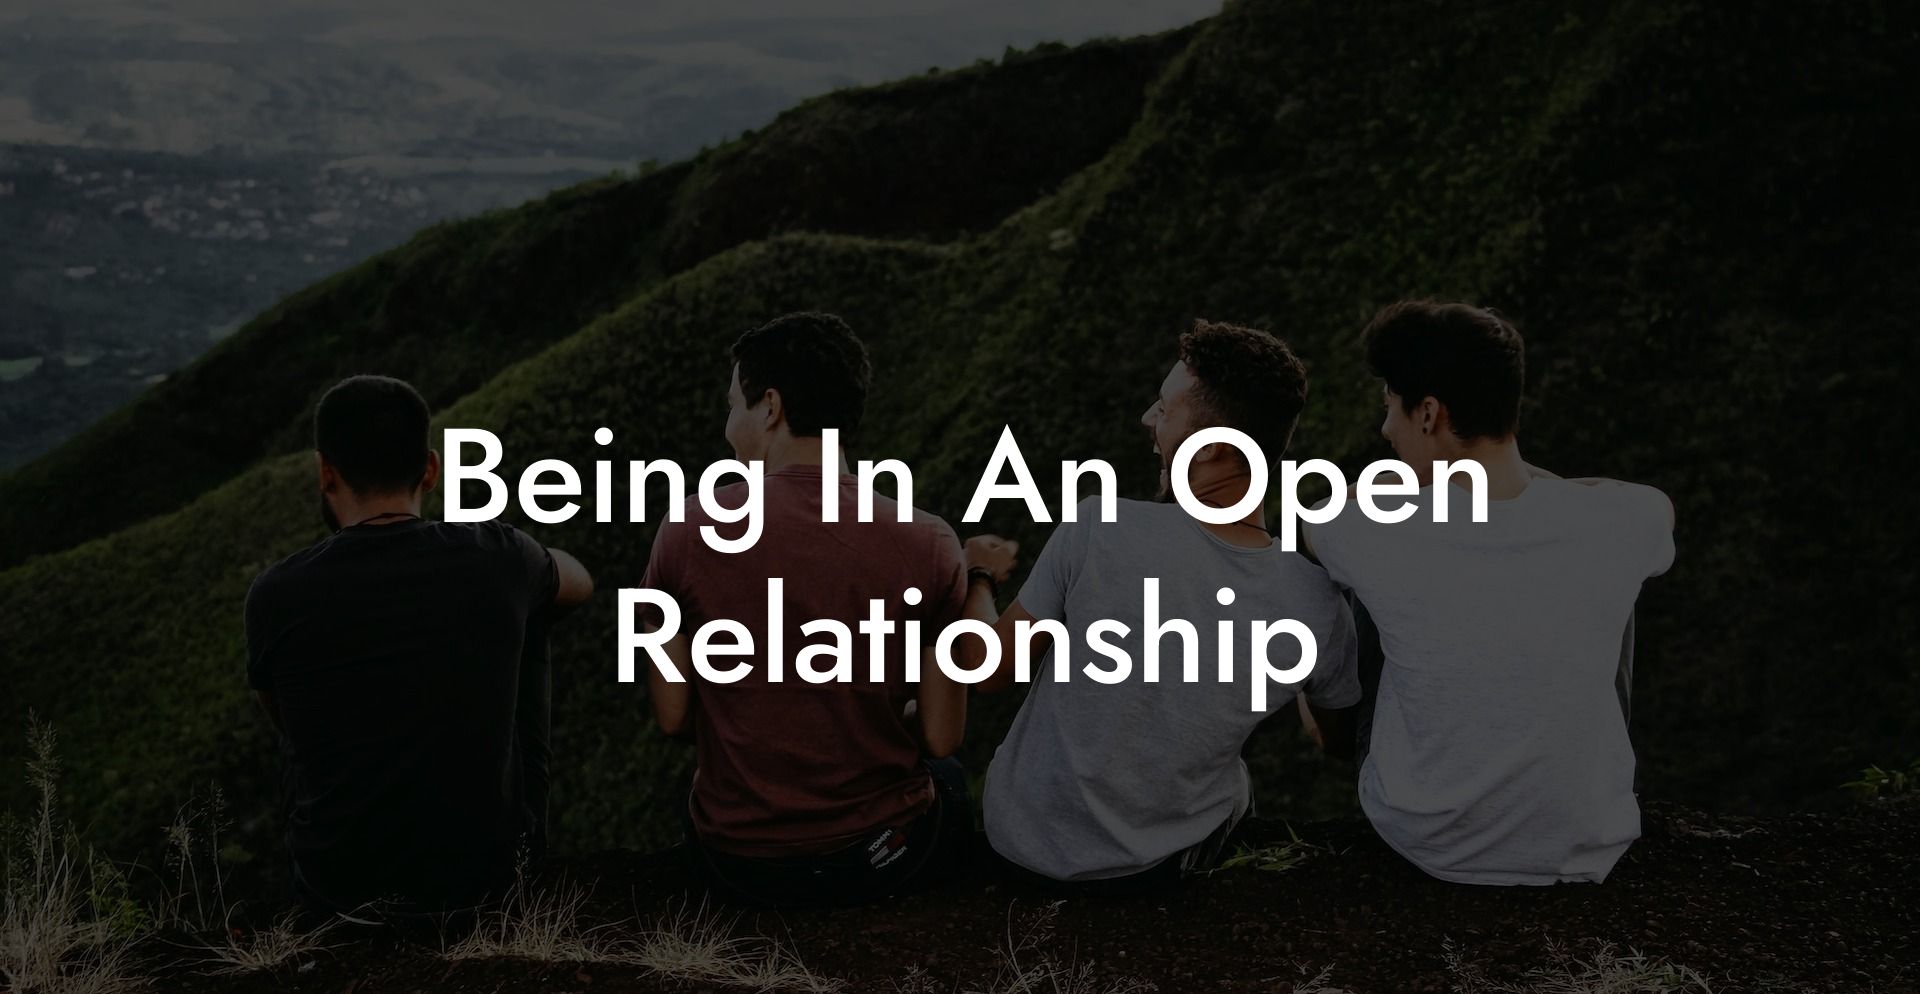 Being In An Open Relationship